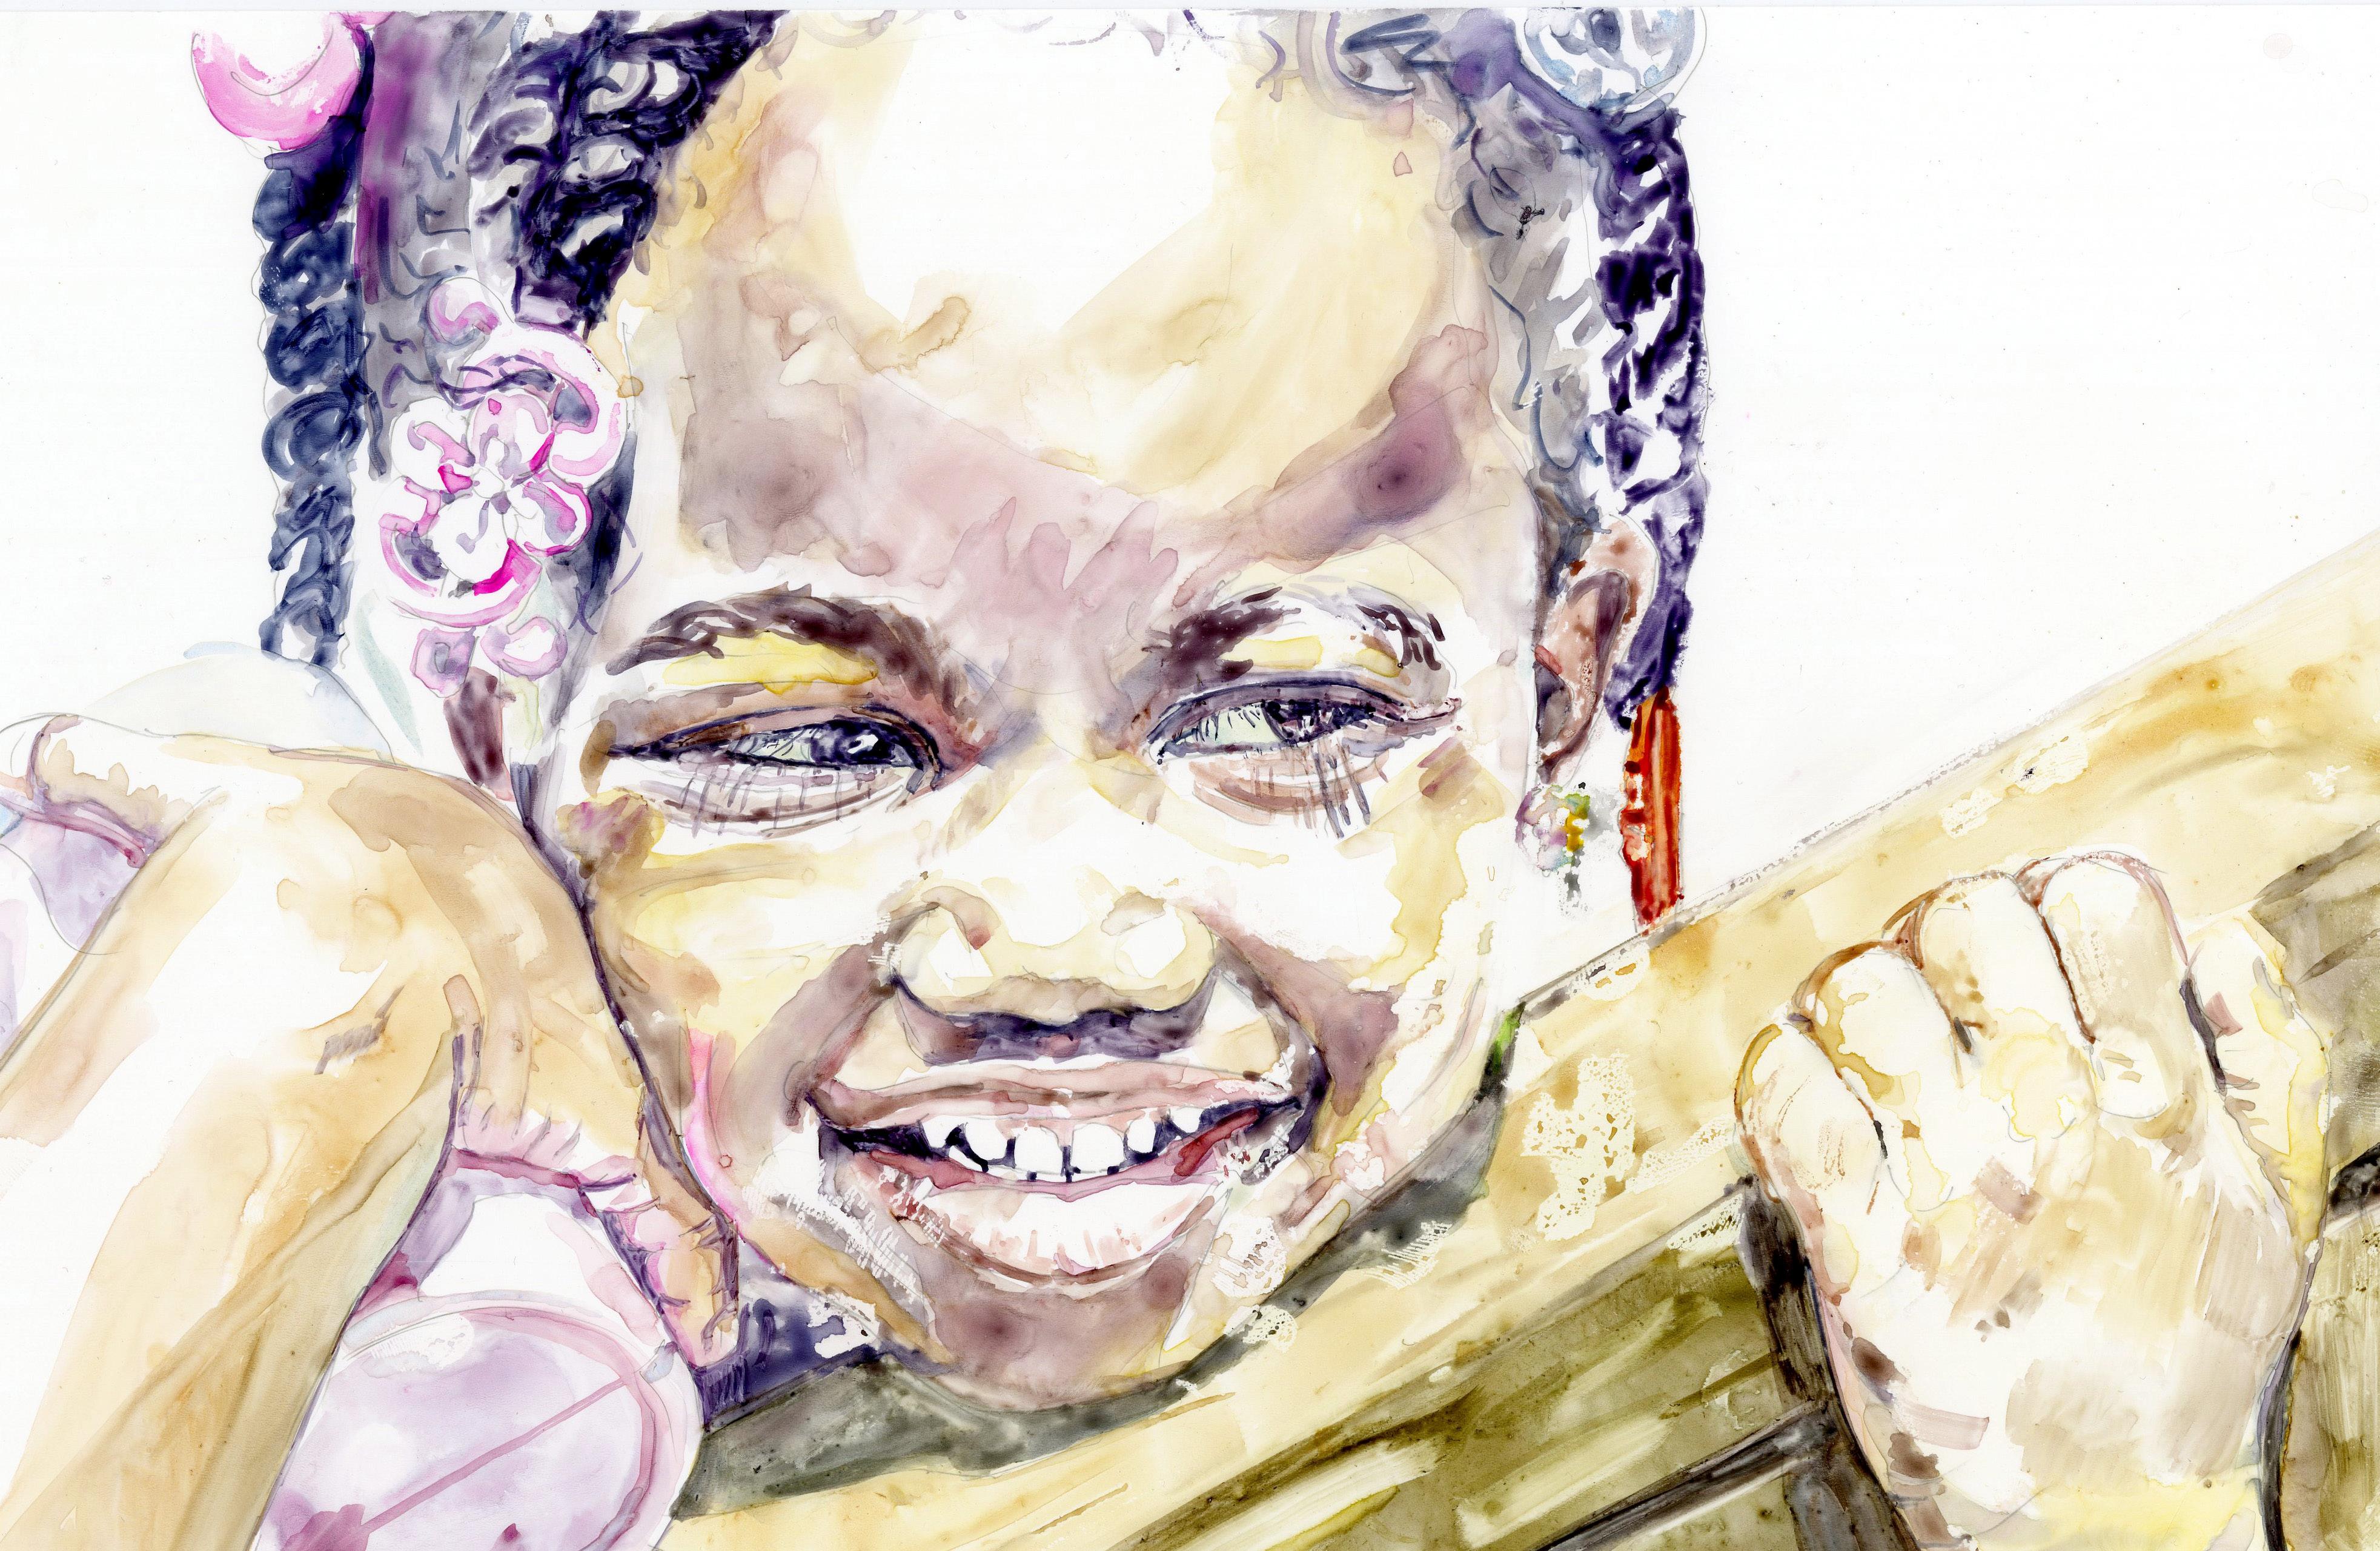 Stolen Moments, Attitude Shift #3     (Emily with a Sippy Cup Smiling) - Contemporary Art by Darius Steward